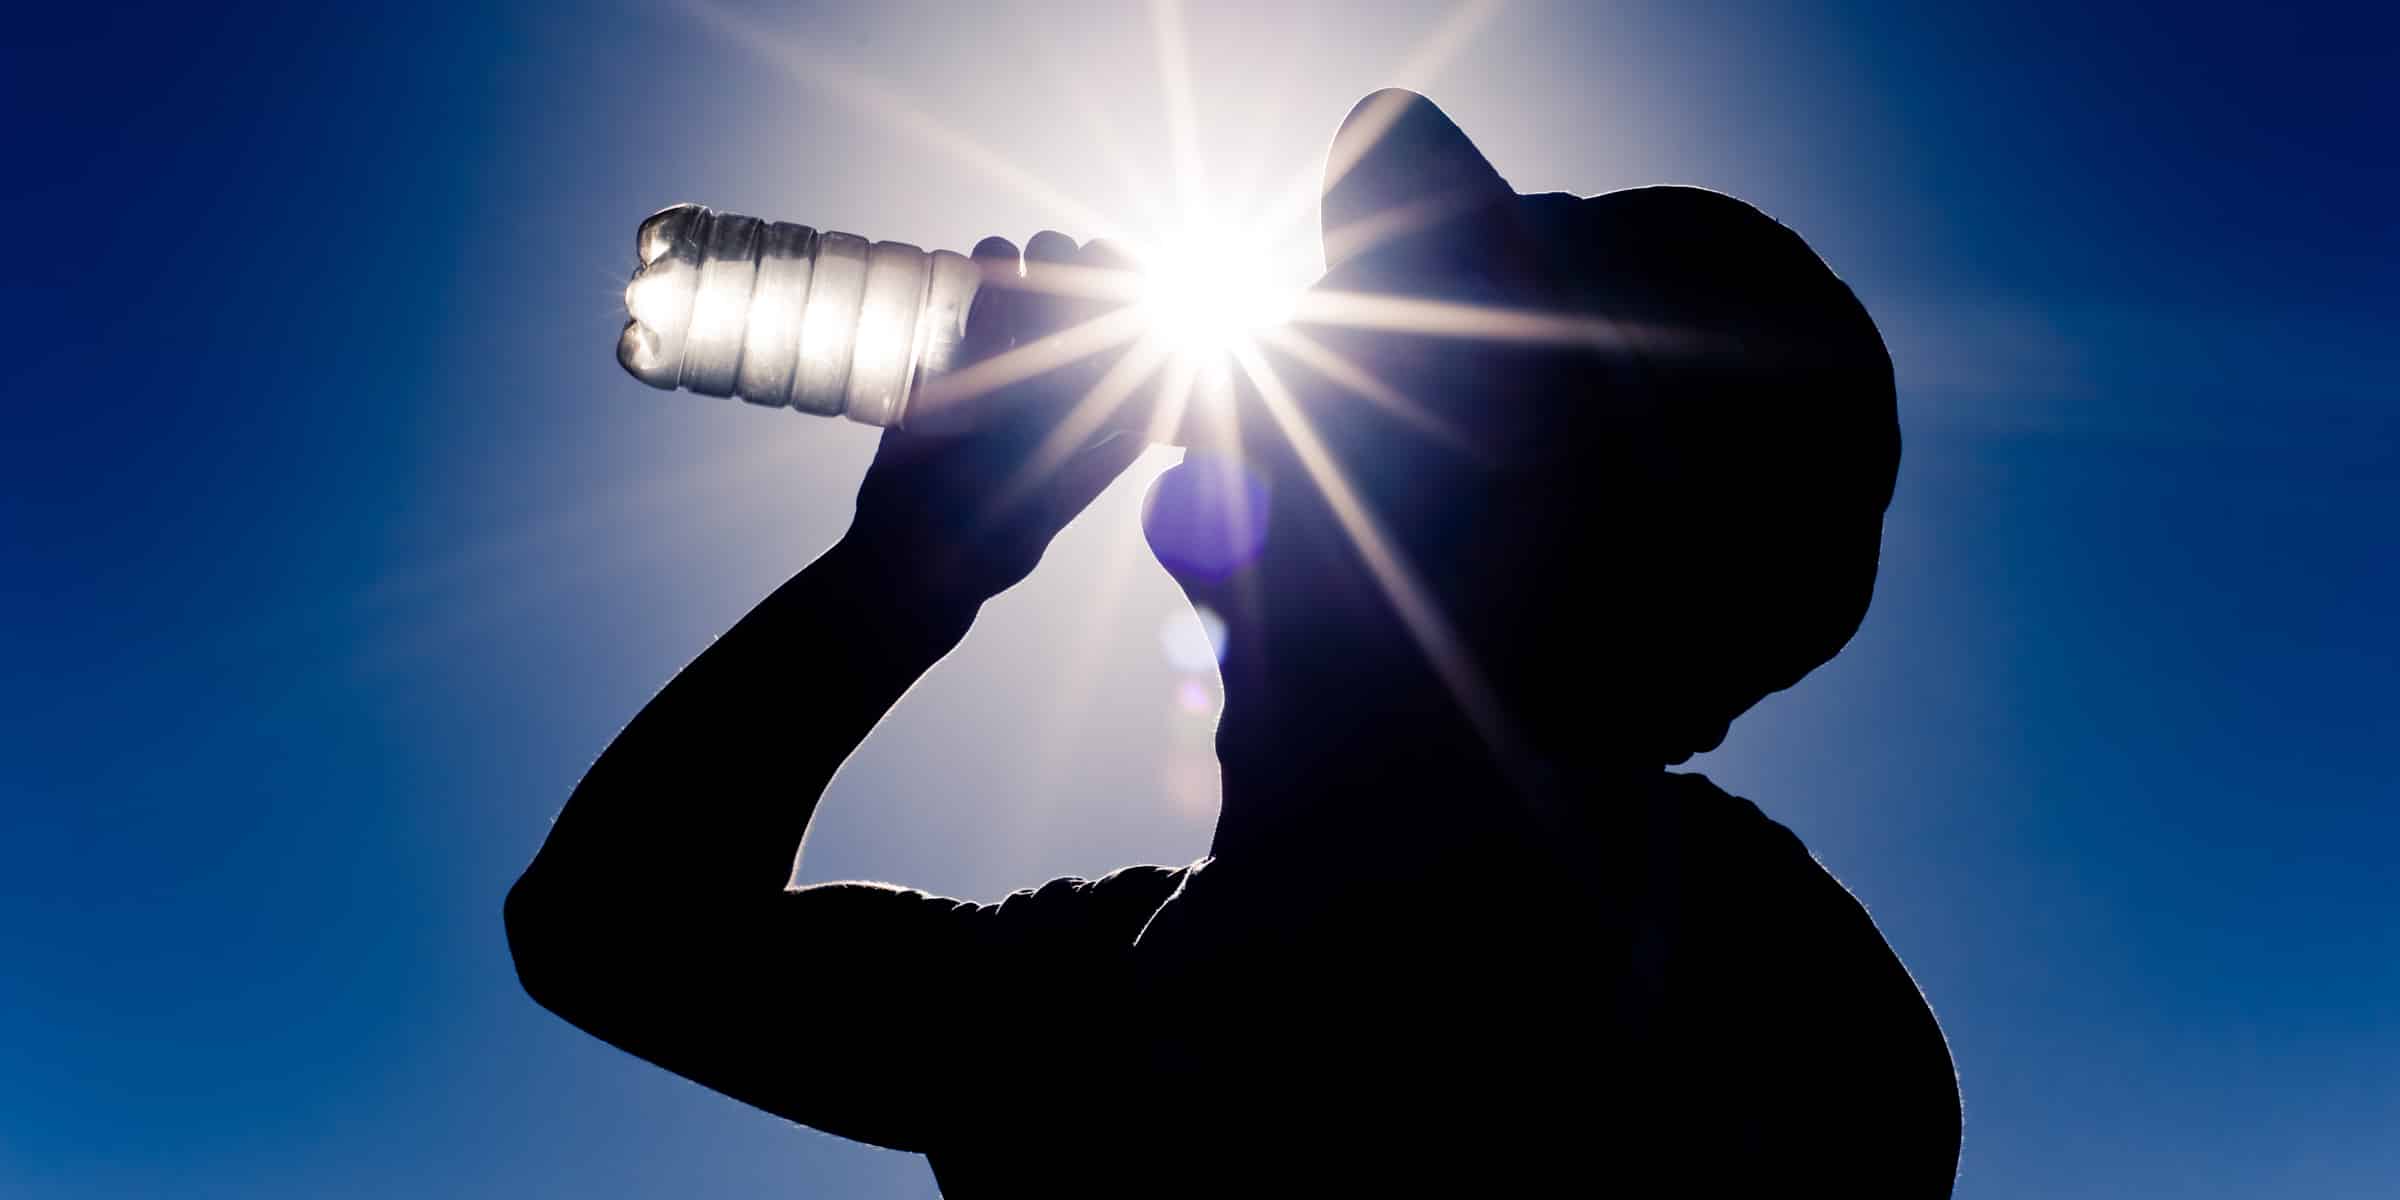 Working outside? How to stay safe in the summer heat, and identify heat illness